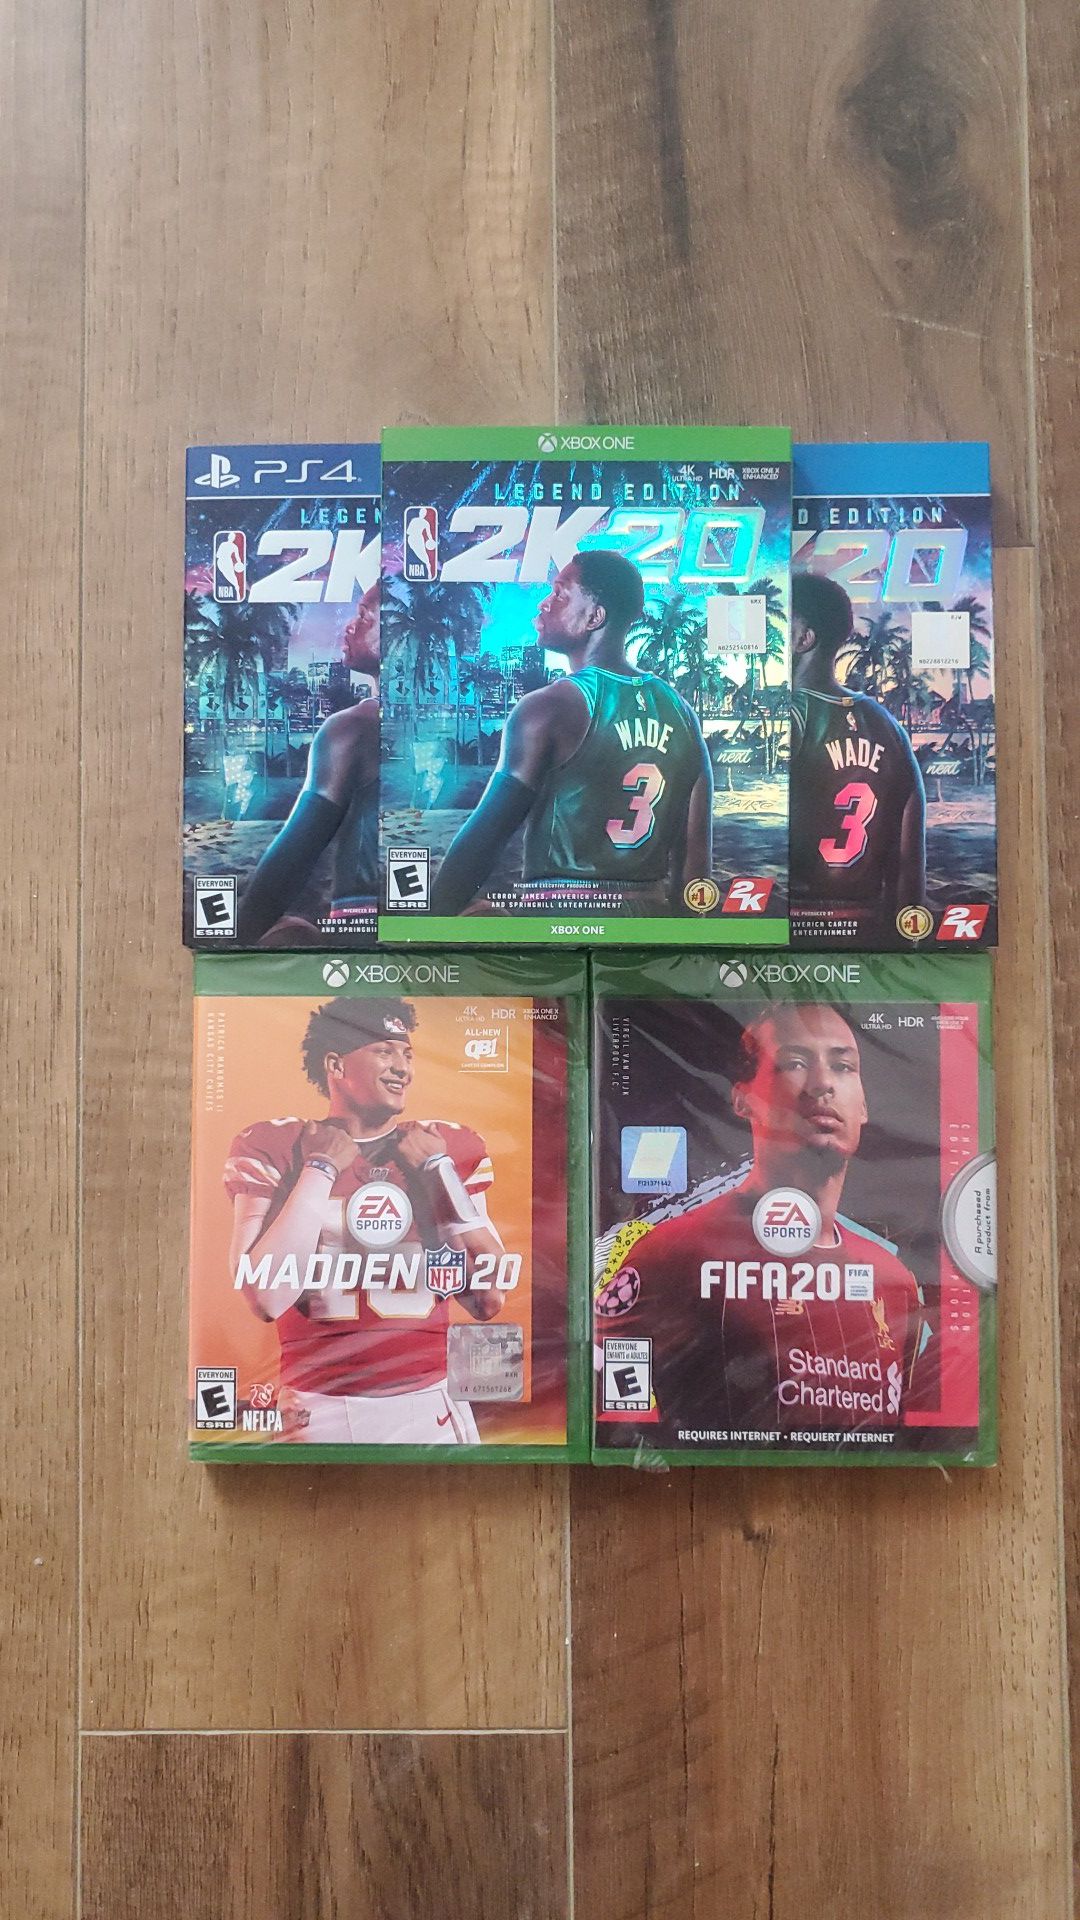 Sports game bundle - all brand new